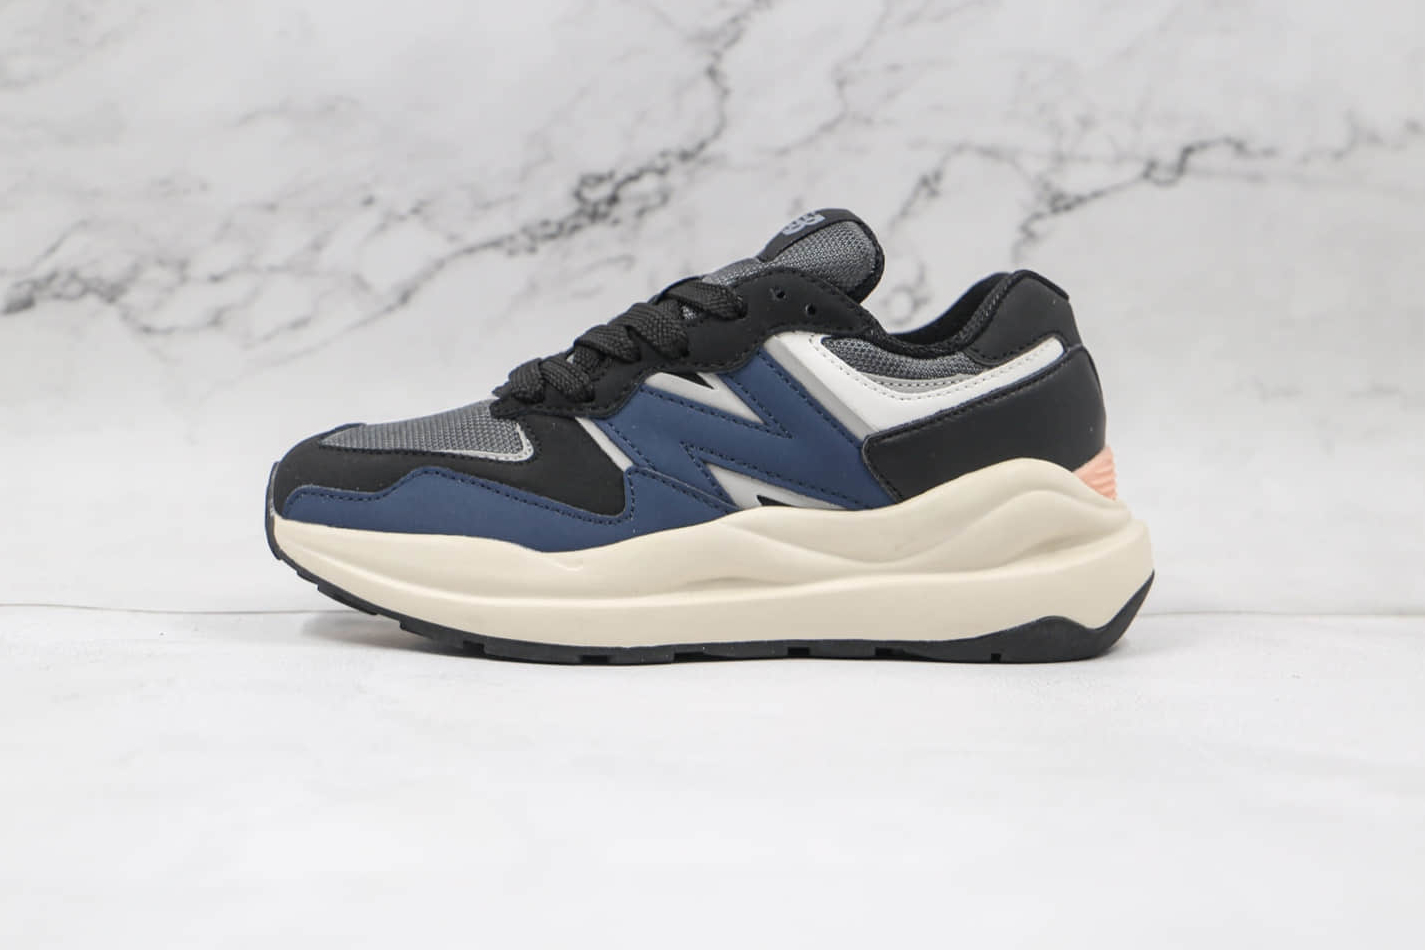 New Balance 5740 'Navy' W5740LB - Sporty and Stylish Women's Sneakers